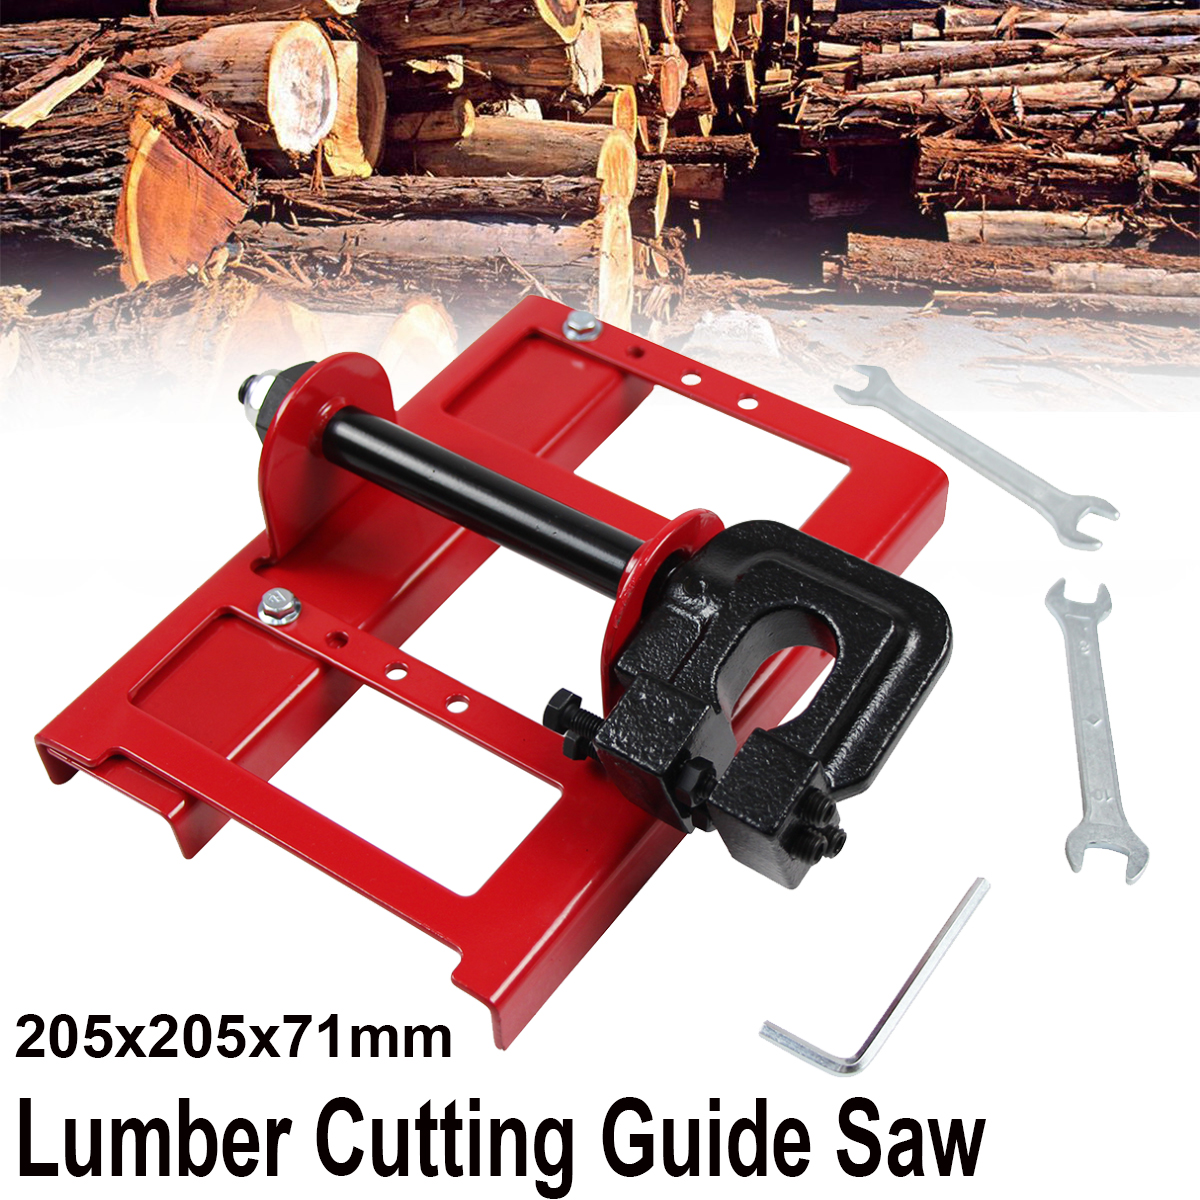 Lumber-Cutting-Guide-Steel-Timber-Tuff-Chainsaw-Attachment-Saw-Cut-Guided-1777898-1